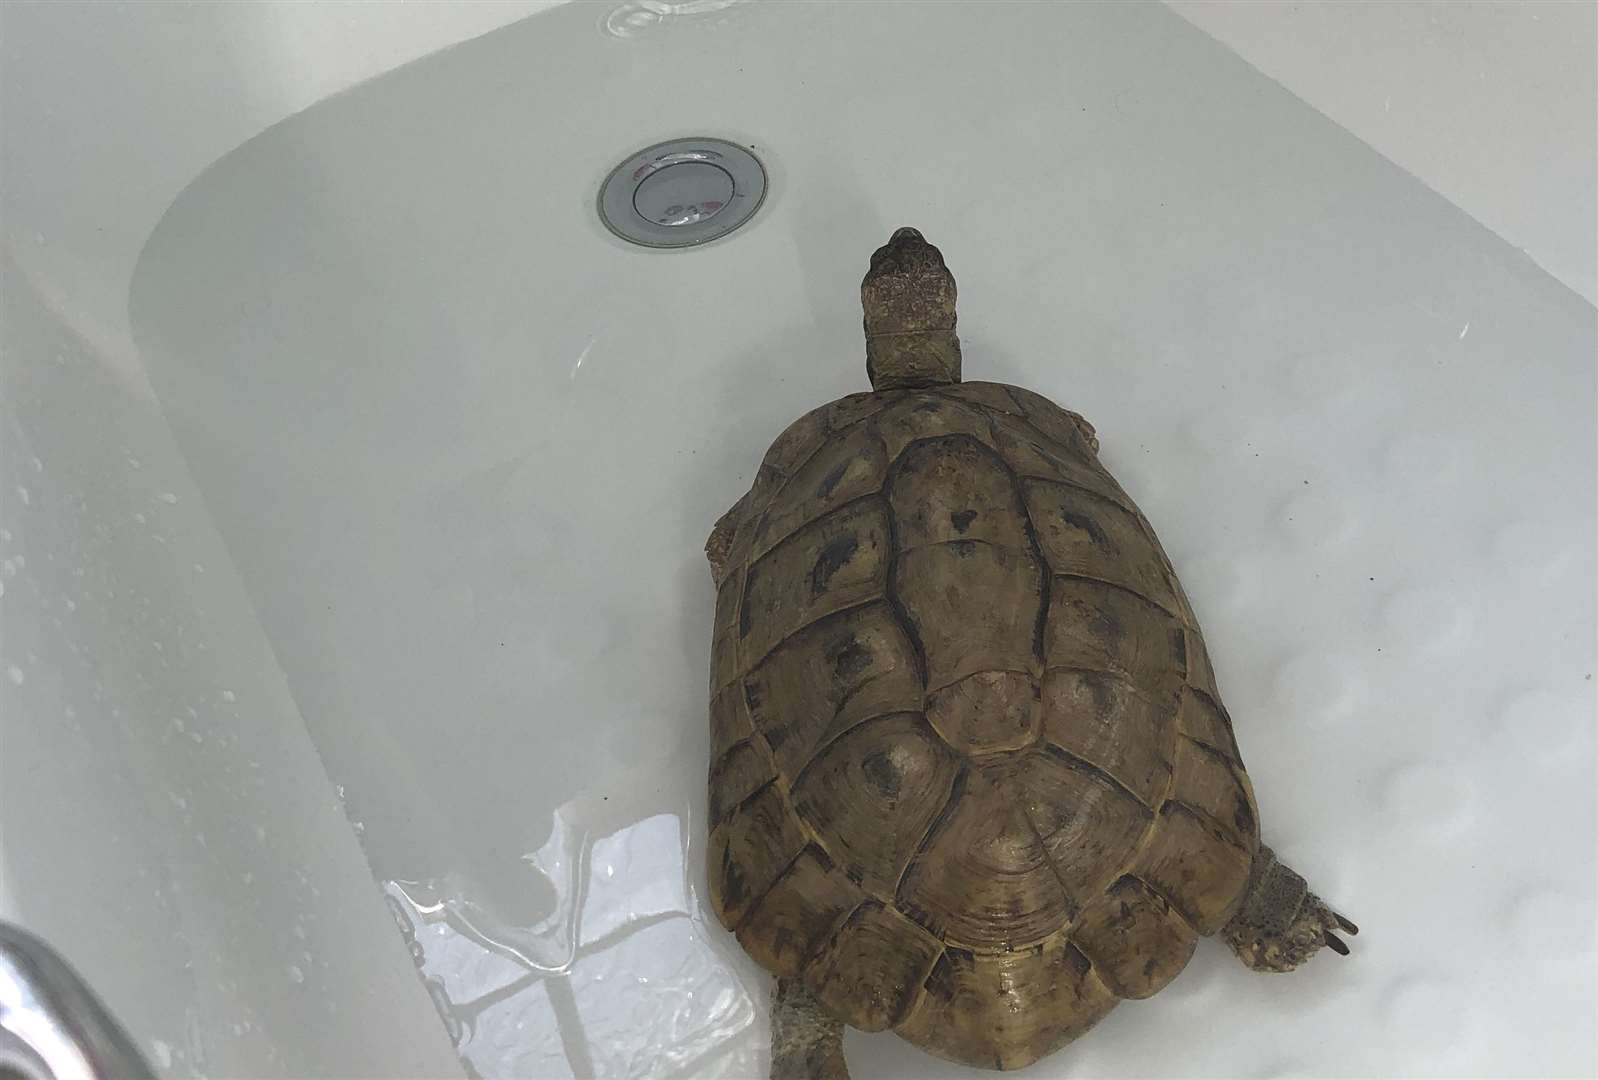 A tortoise cooling down in a bath